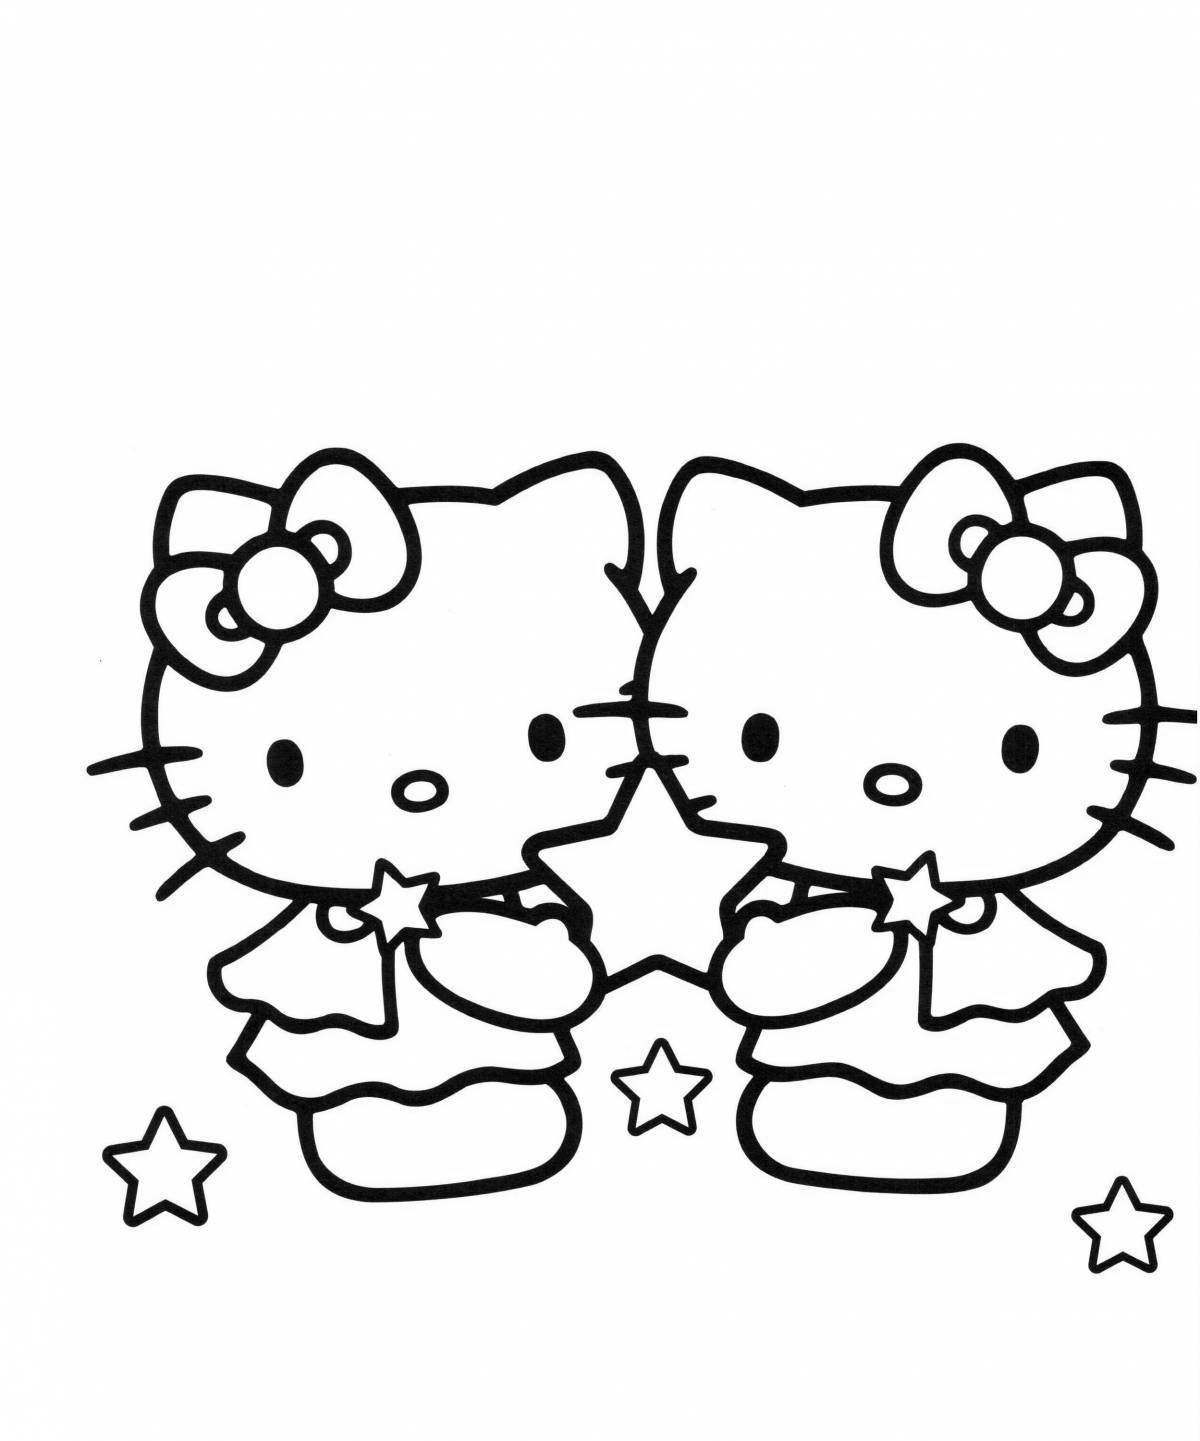 Delightful hello kitty chickens coloring pages